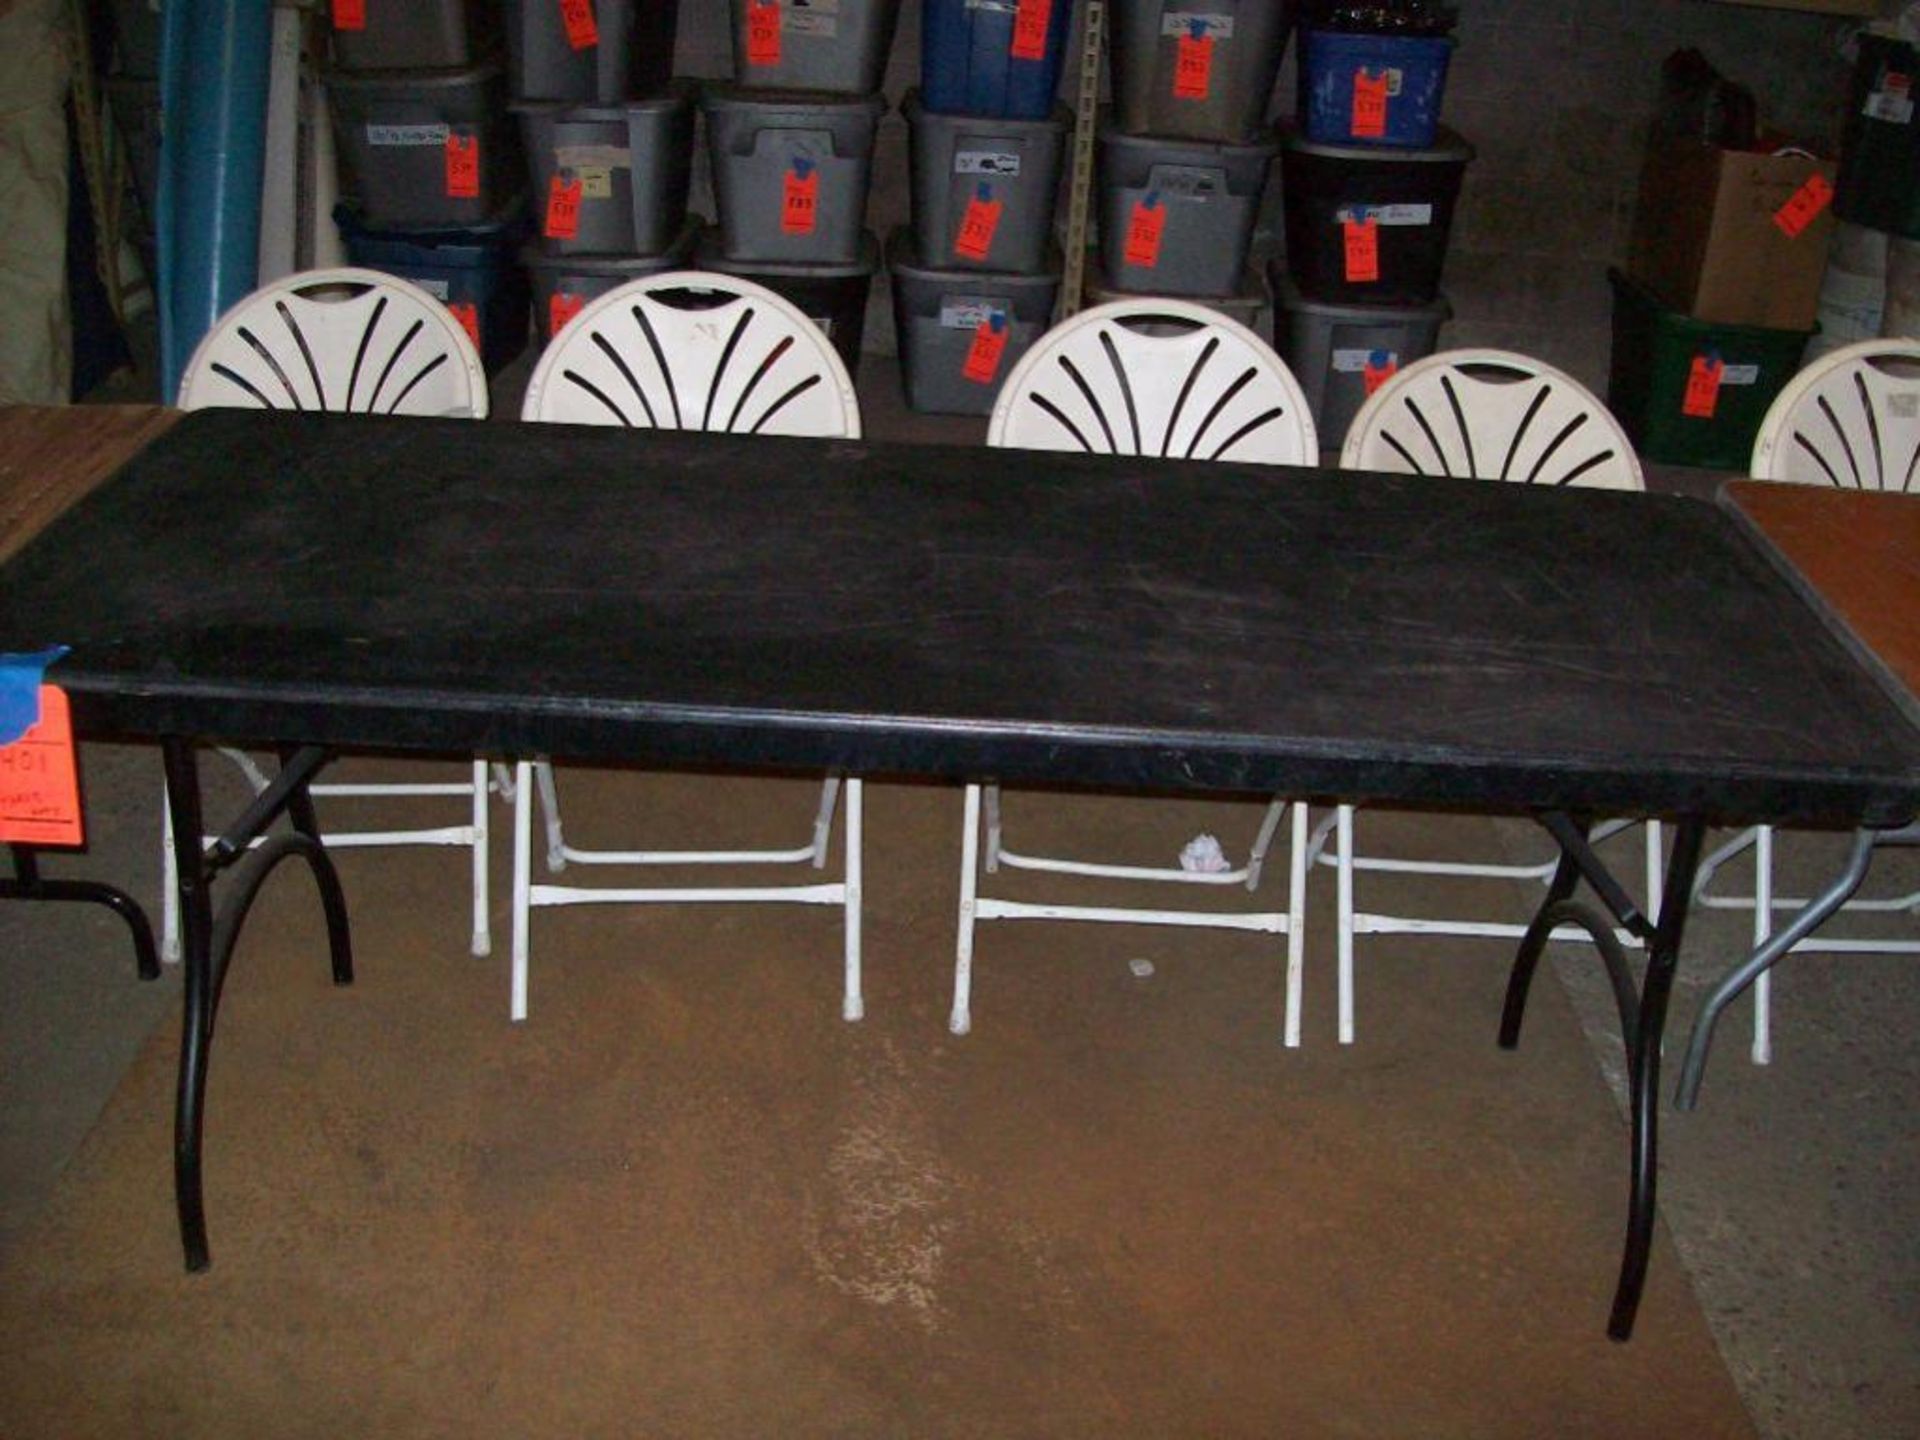 Lot of (5) assorted plastic tables with folding legs, (2) white 6' long, (2) black 6' long, and (1) - Image 3 of 3